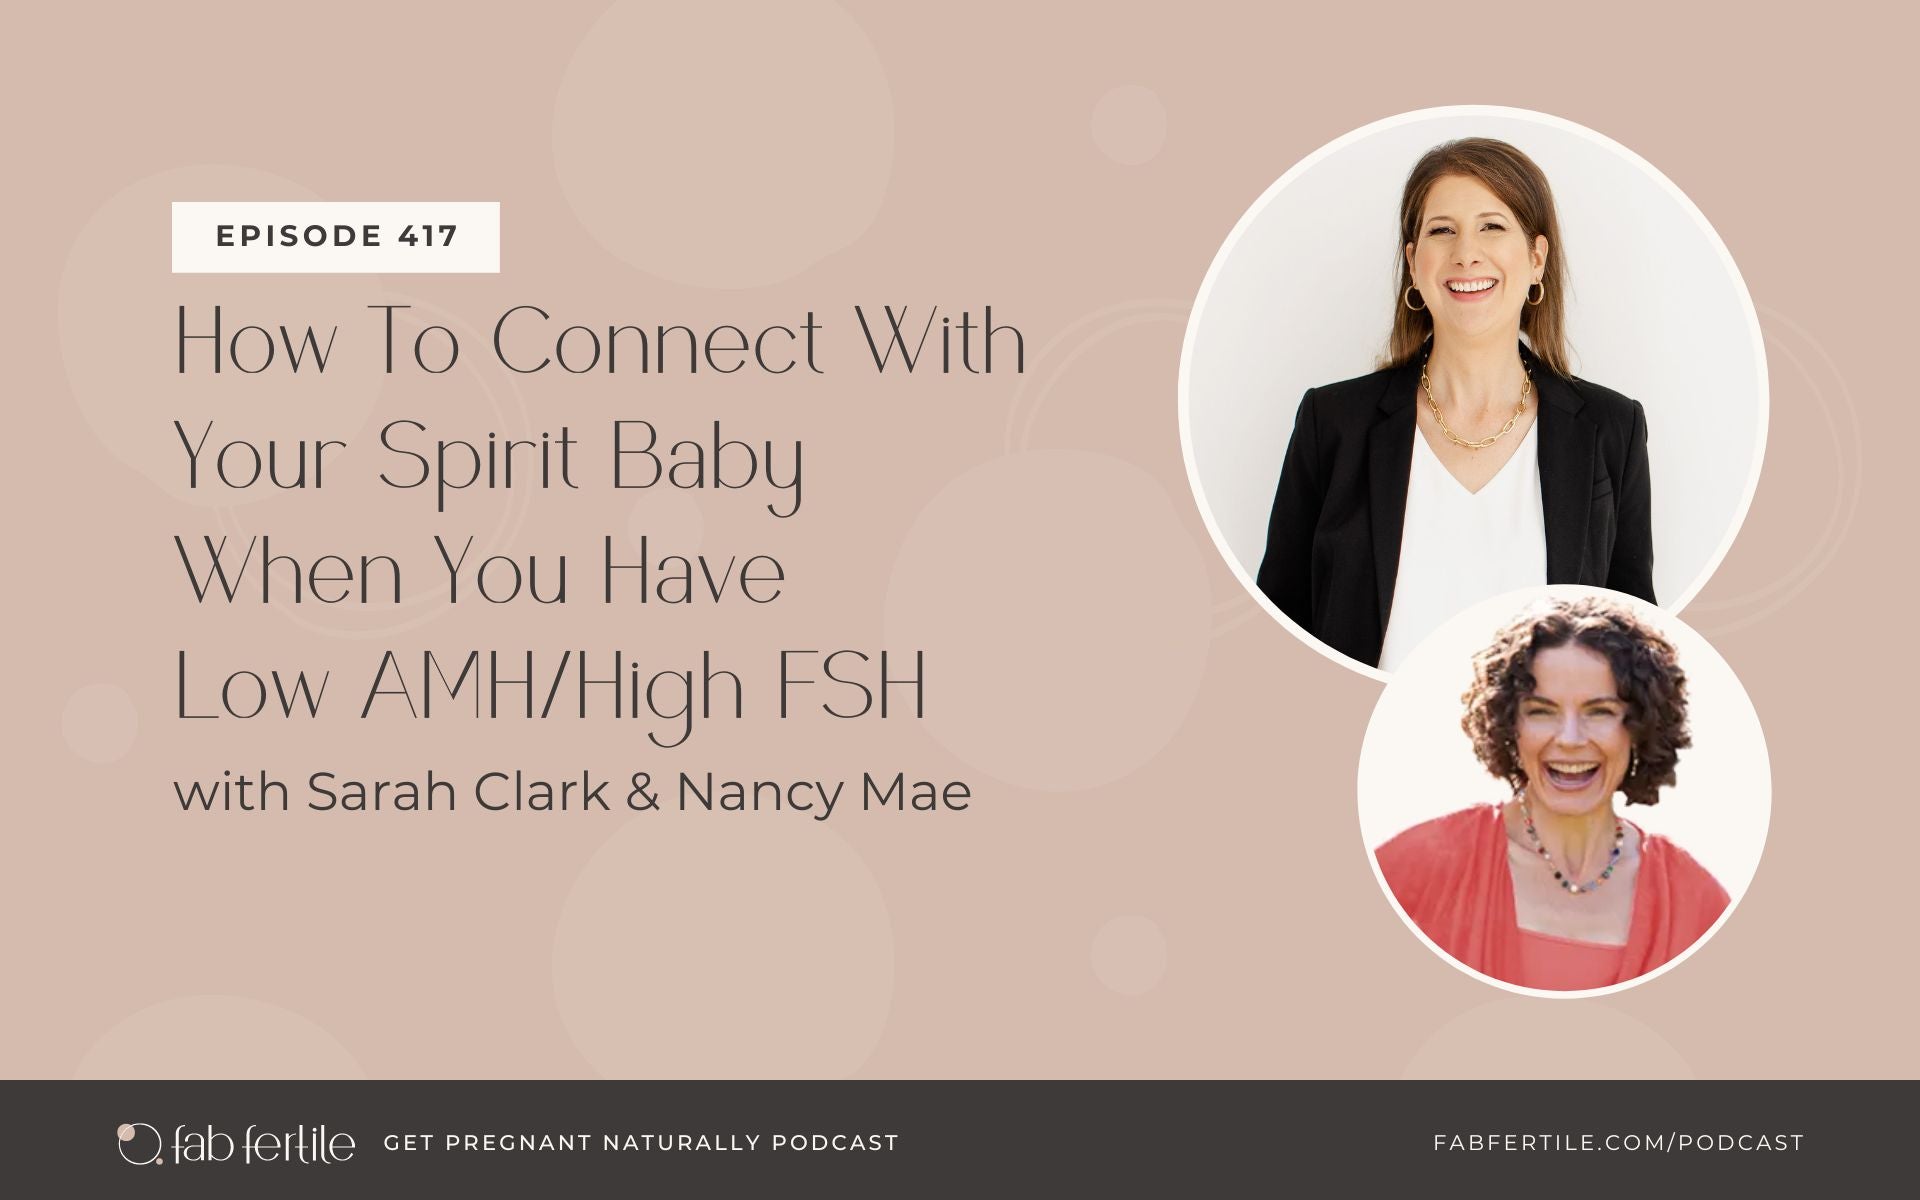 How To Connect With Your Spirit Baby When You Have Low AMH/High FSH